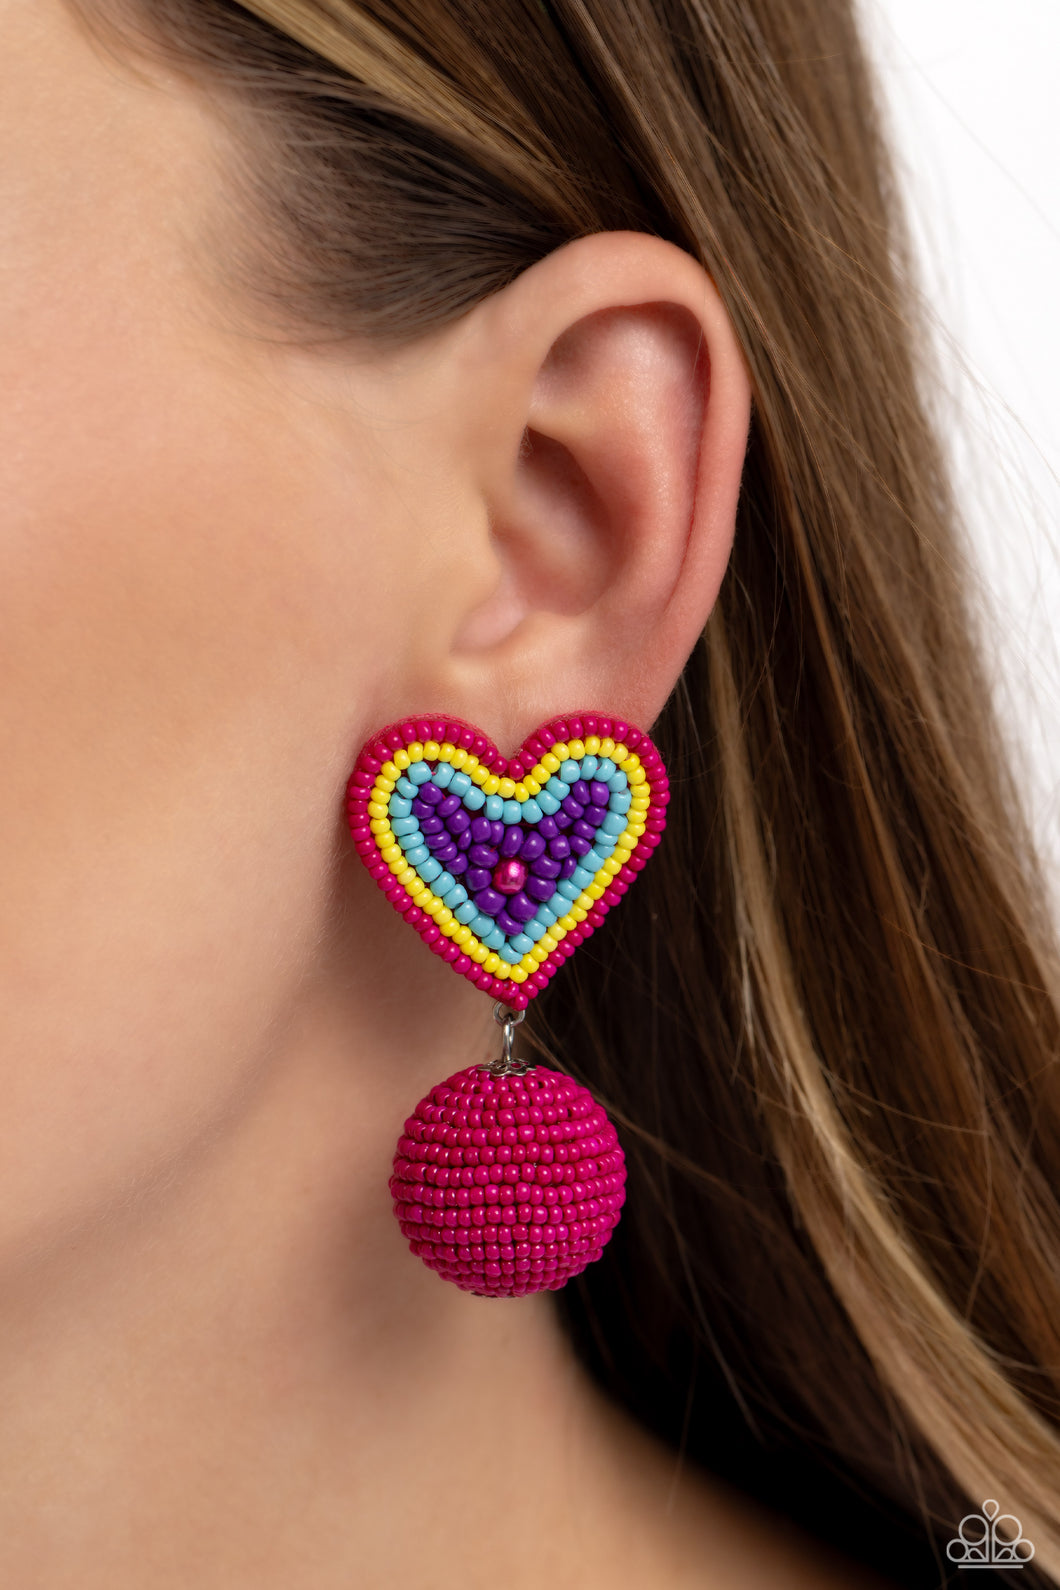 Featuring a hot pink pearl center, a hot pink, yellow, turquoise, and purple seed bead heart frame gives way to strands of hot pink seed beads that decoratively spin around a spherical frame, resulting in a colorful three-dimensional display. Earring attaches to a standard post fitting.  Sold as one pair of post earrings.